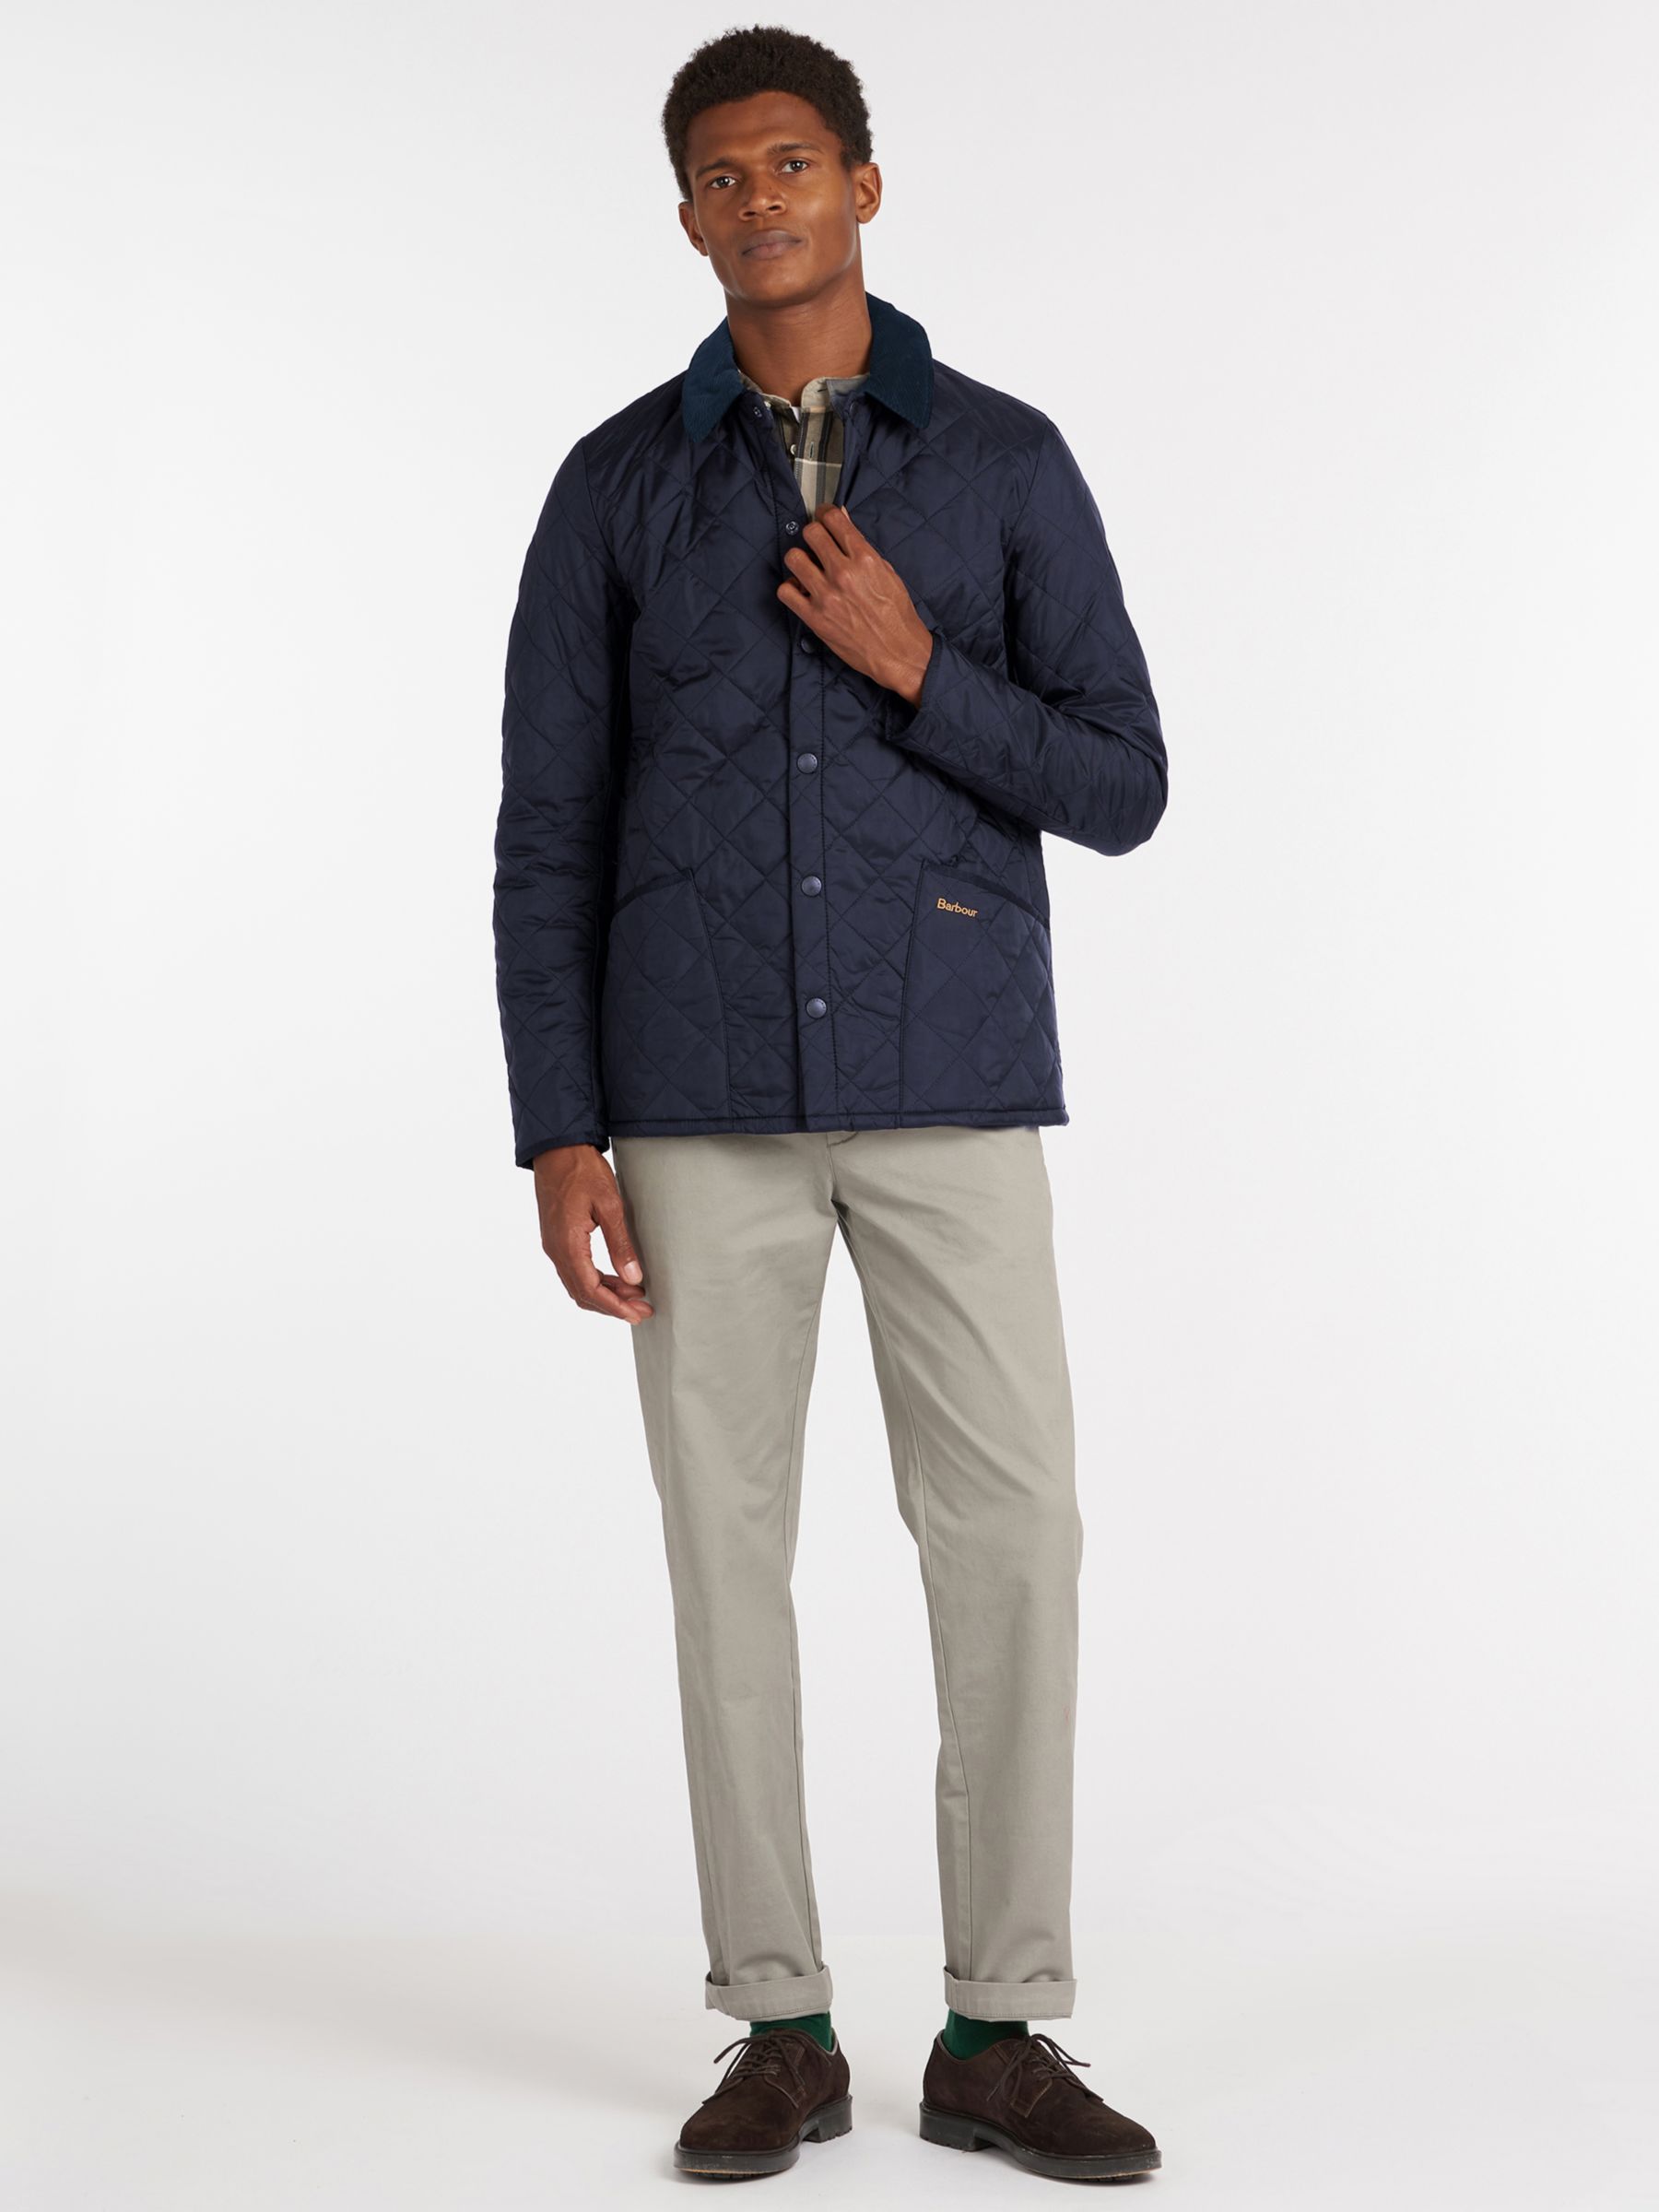 Barbour Heritage Liddesdale Quilted Jacket, Navy at John Lewis & Partners